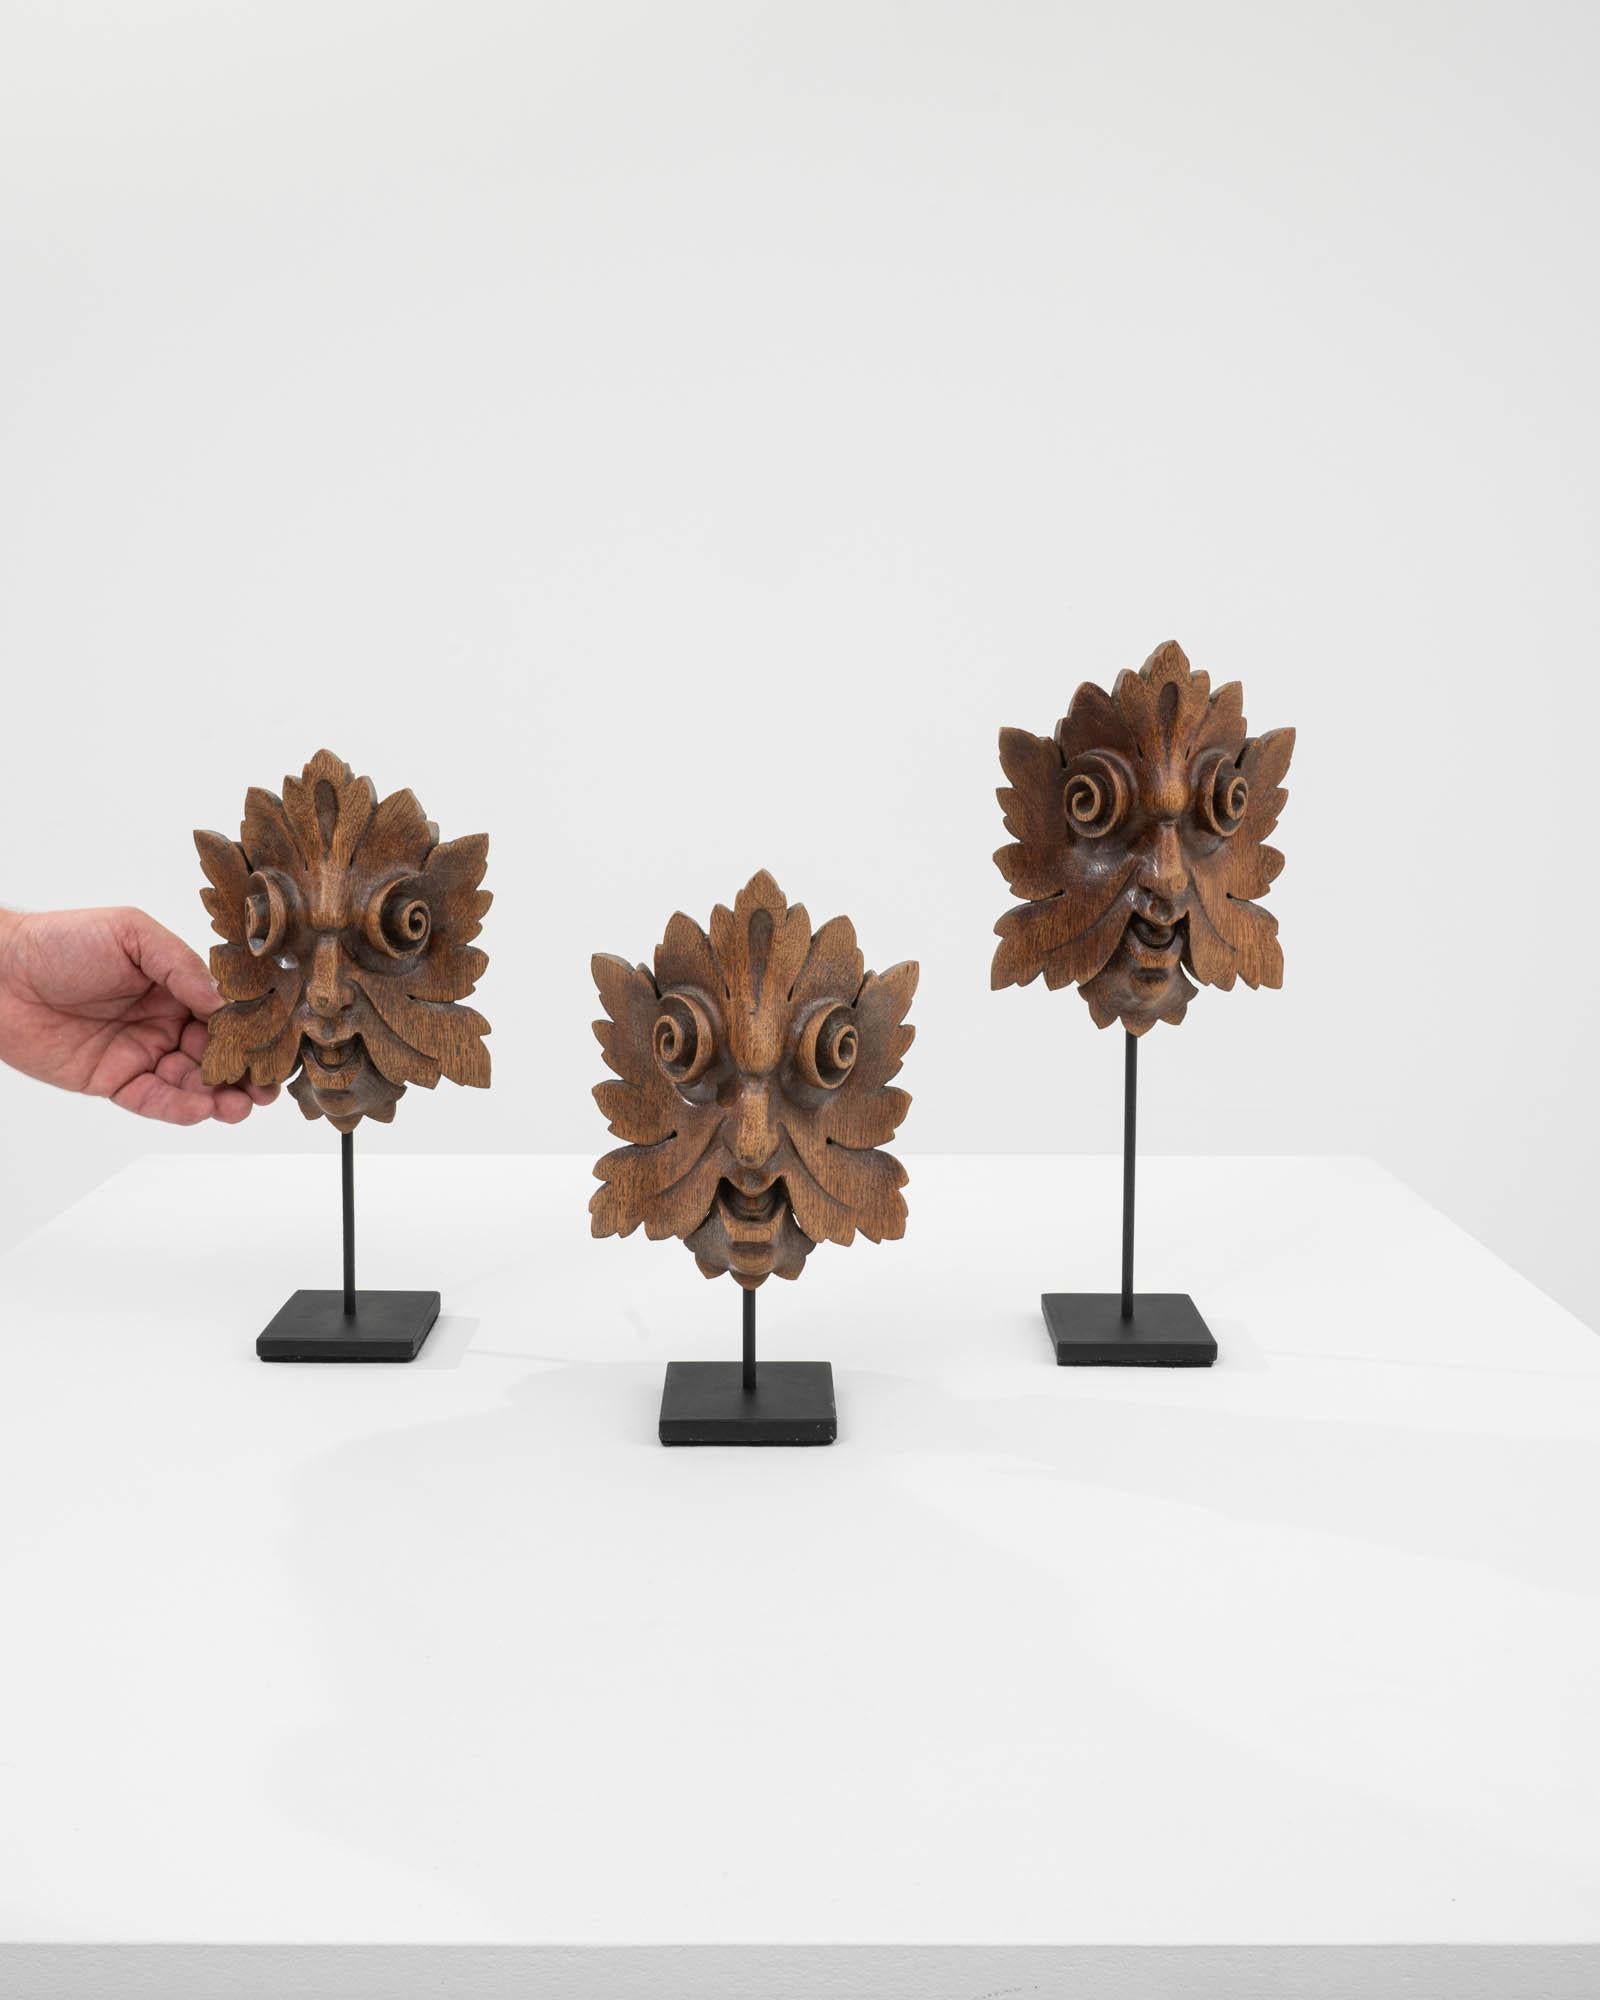 Immerse your space in the enchanting beauty of this set of 19th-century French wooden decorations on metal stands. Delicately crafted, each piece takes the form of a leaf, its intricate design breathing life into the wood. The wooden leaves boast